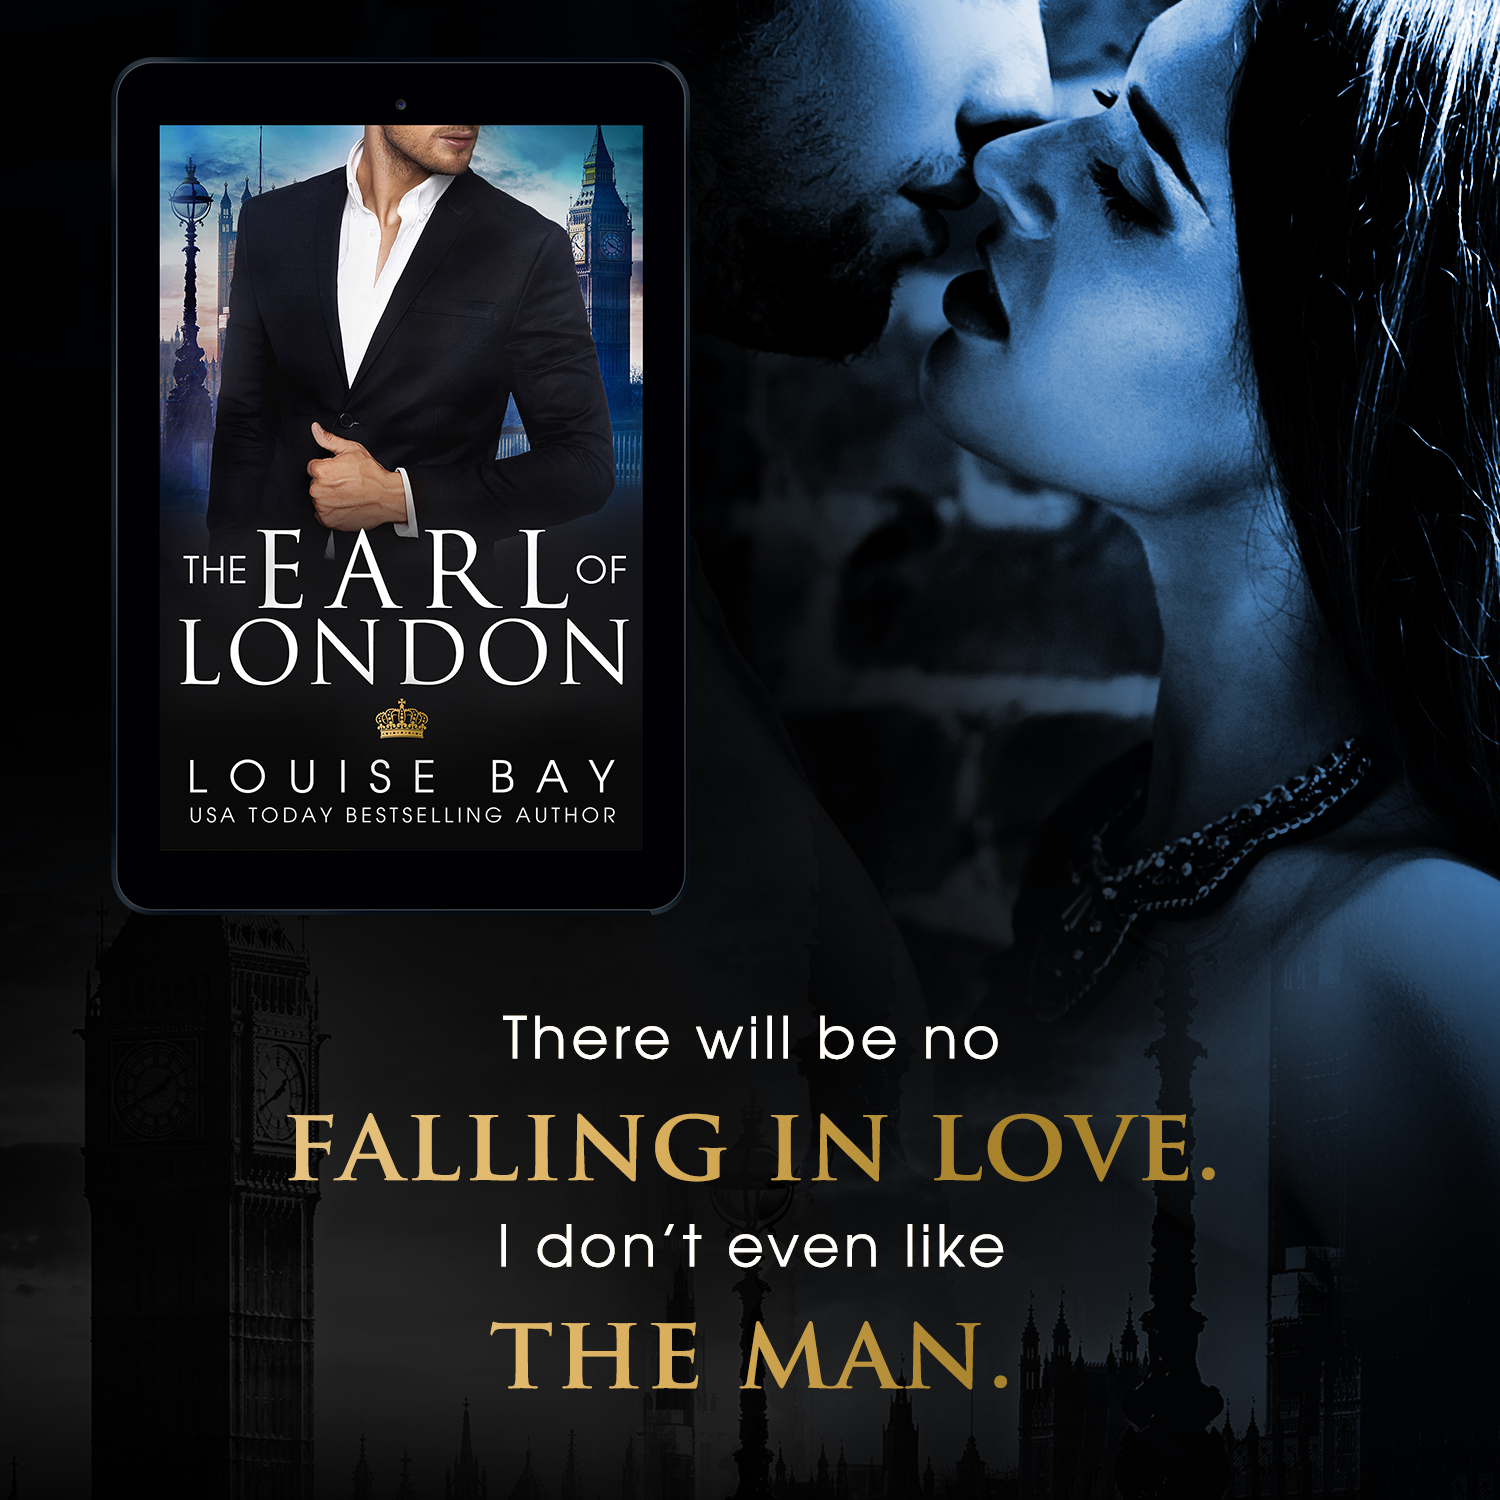 Booked All Night: THE EARL OF LONDON BY LOUISE BAY - ARC REVIEW